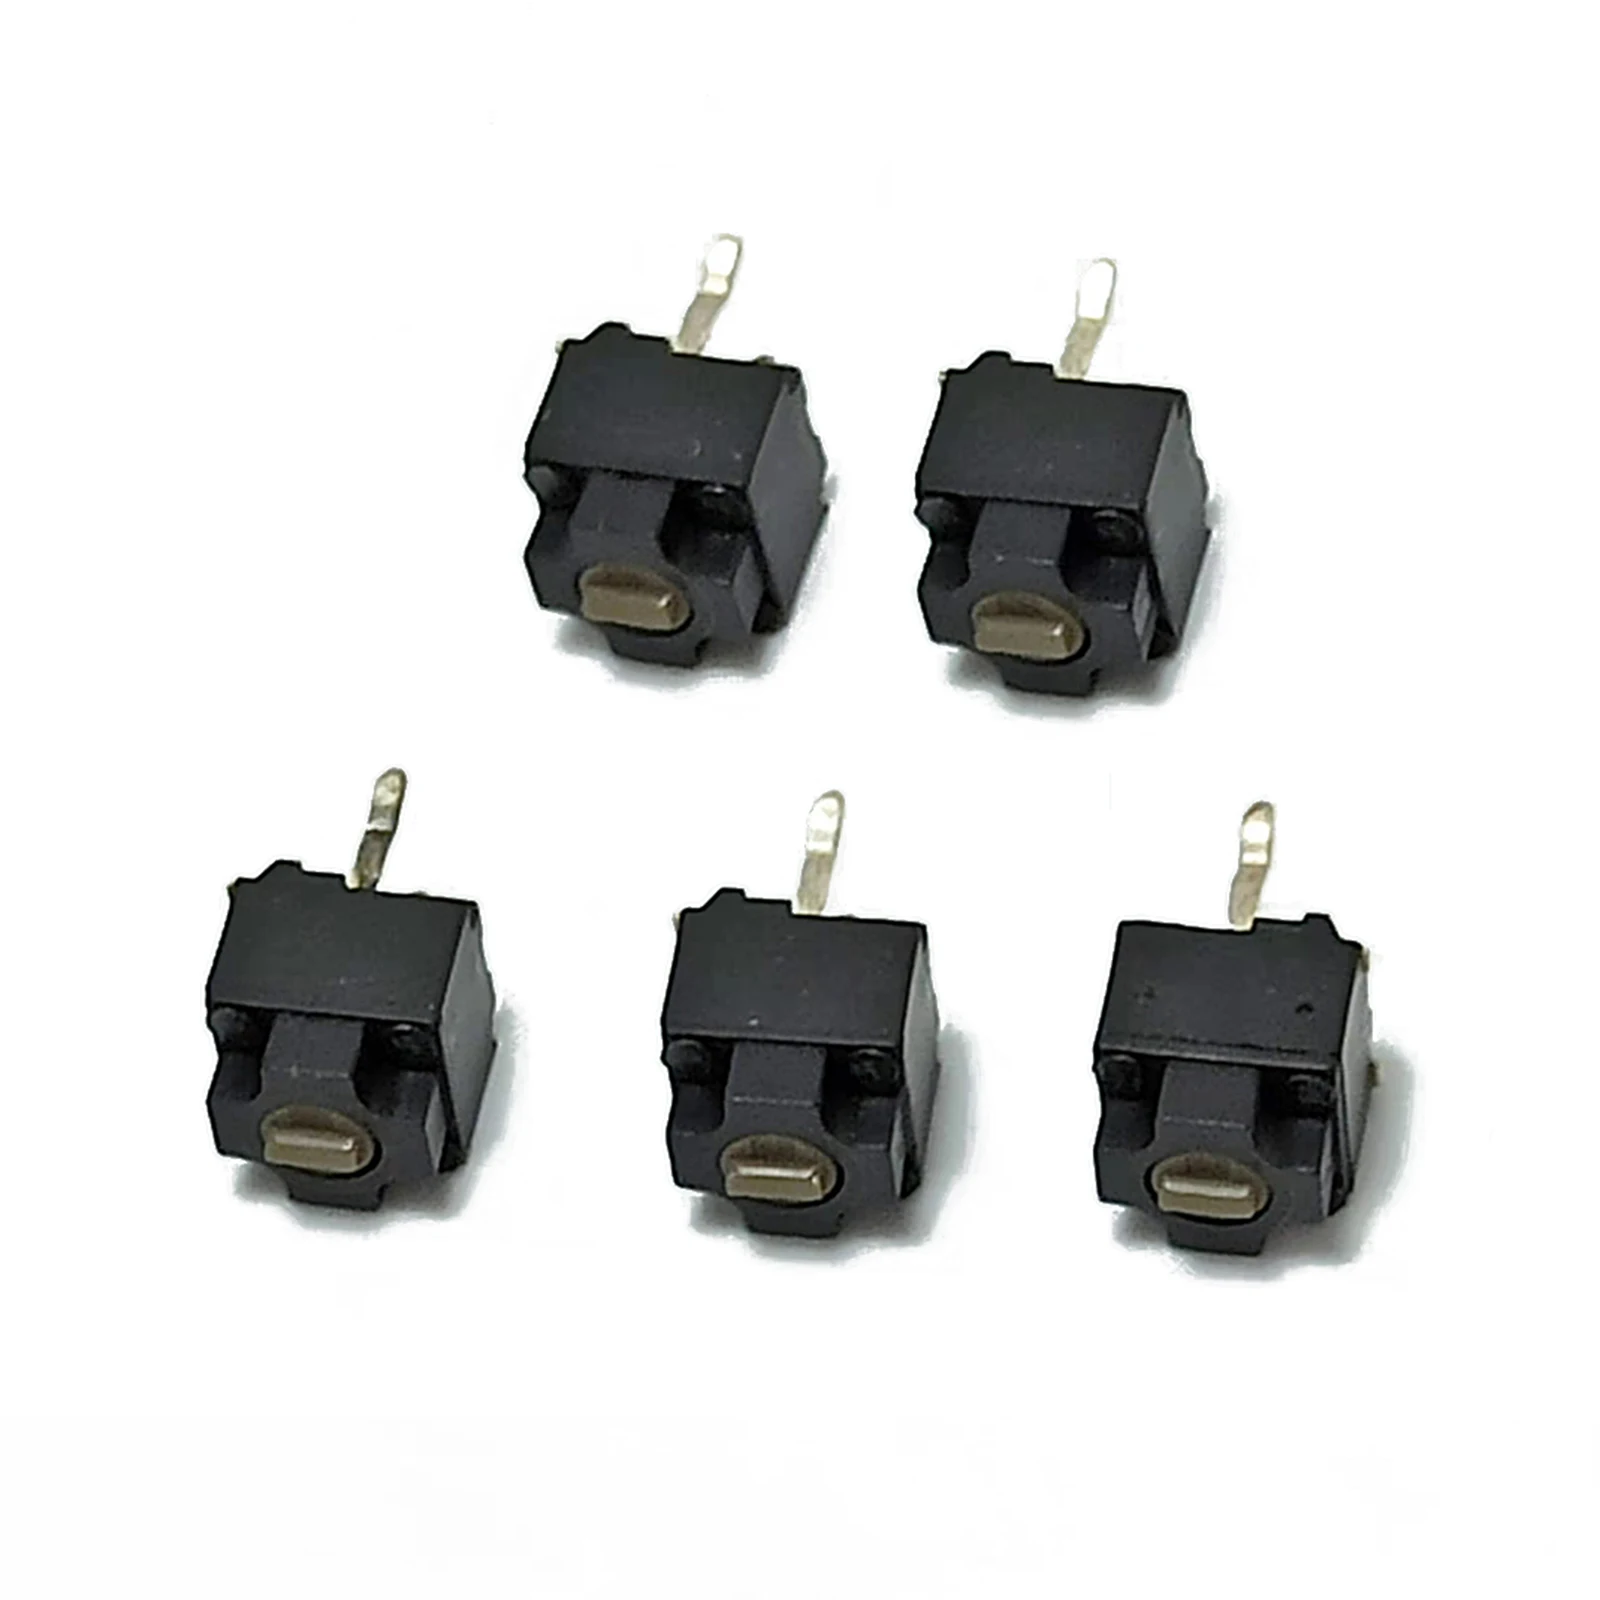 

5PCS 0.74N Mouse Micro Switch Button for Micro Soft Ie3.0 Roller Io1.1 Ie4.0 Brown Spots Original Microswitch Buttons Dropship